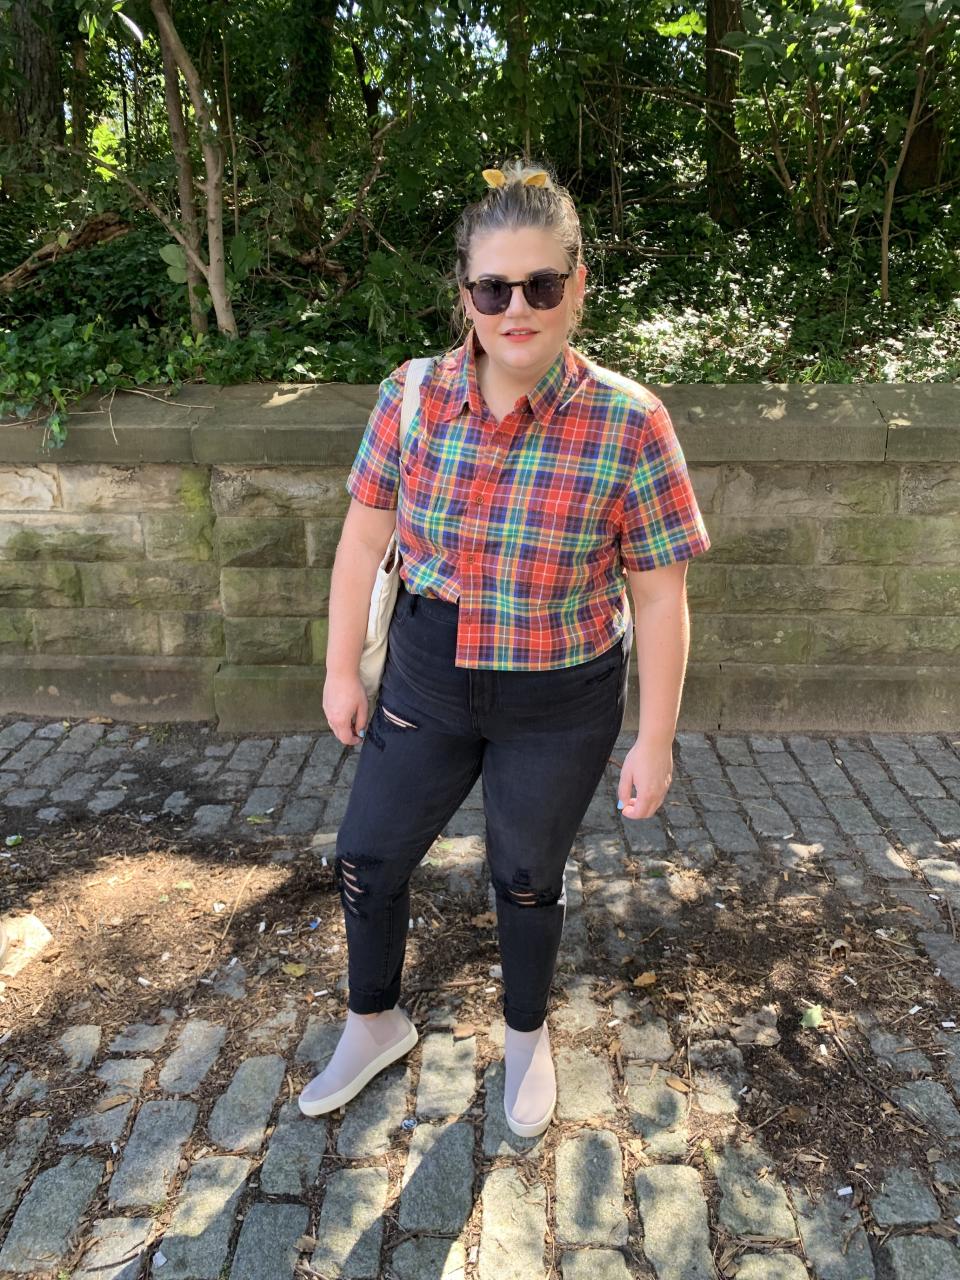 I wore the Chelsea around for a full Saturday, taking them from Prospect Park to Greenpoint. I walked more than 11,000 steps in the Chelsea boot when all said and done. (Photo: Brittany Nims x HuffPost)